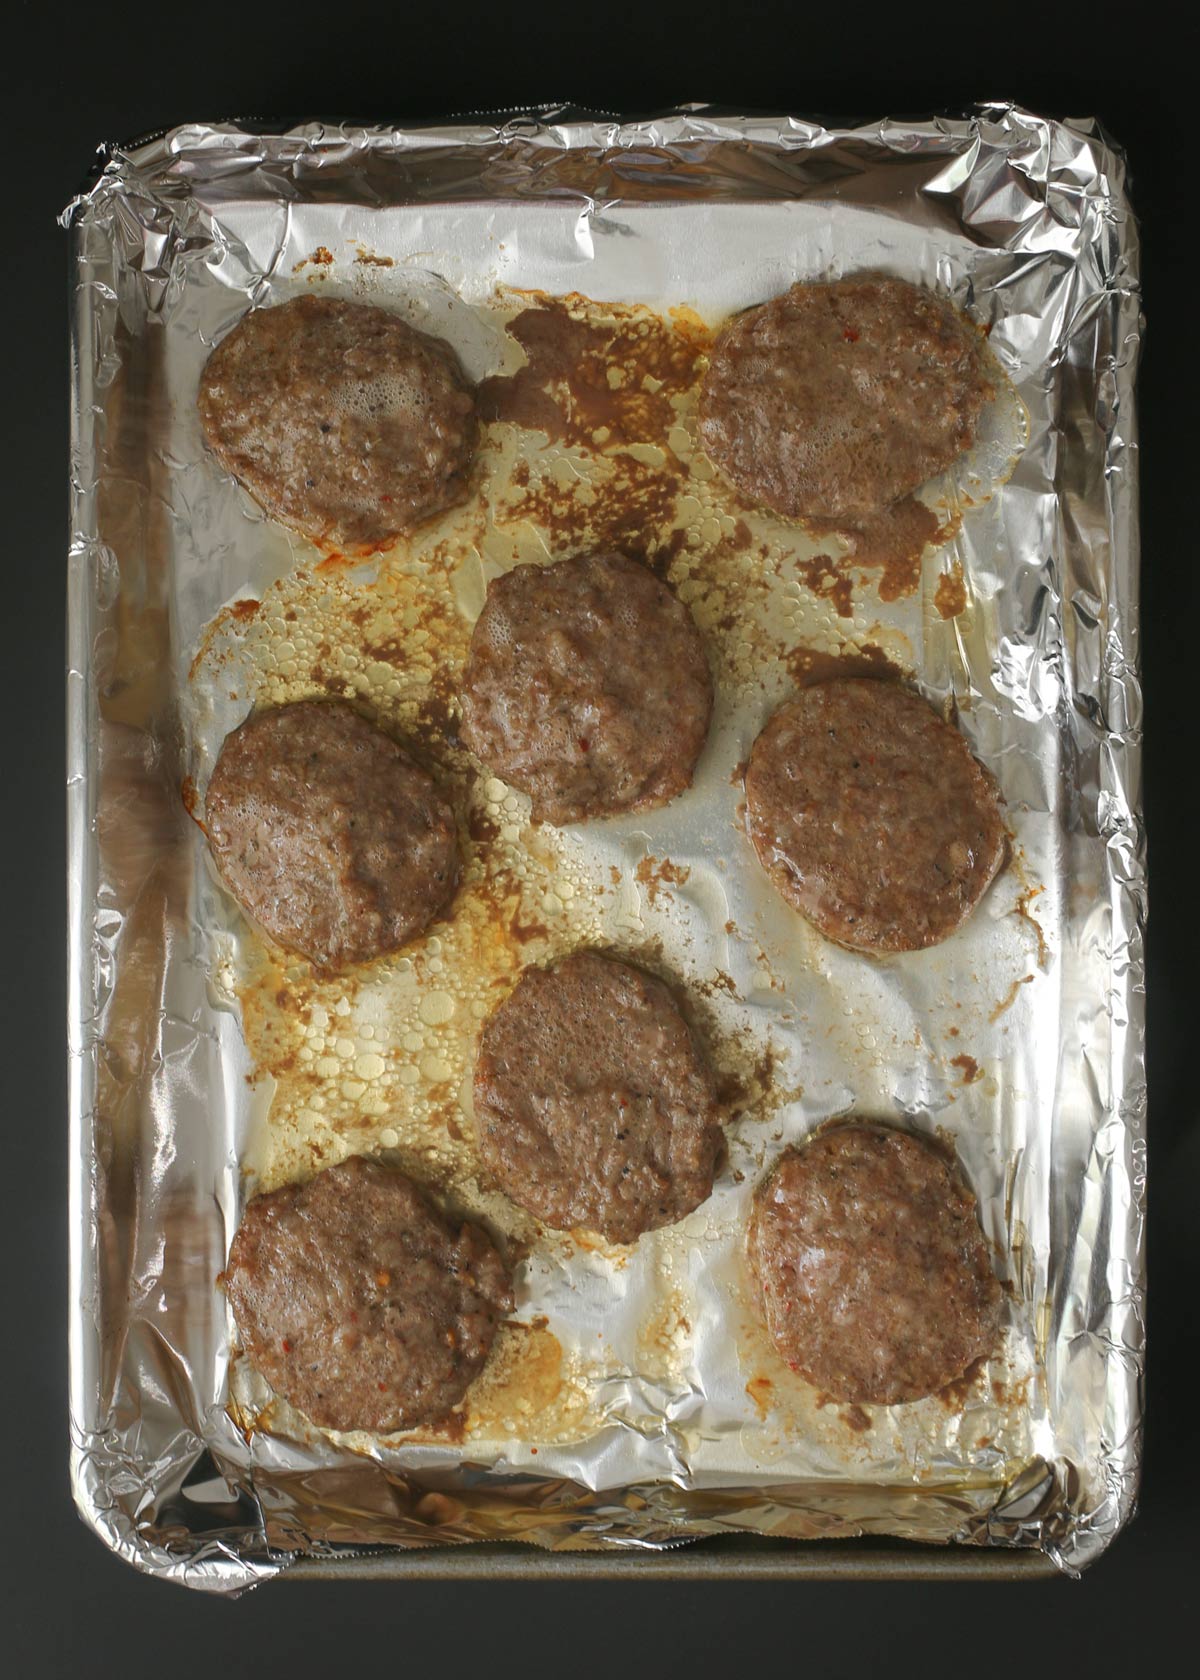 cooked sausage patties on foil in baking sheet.